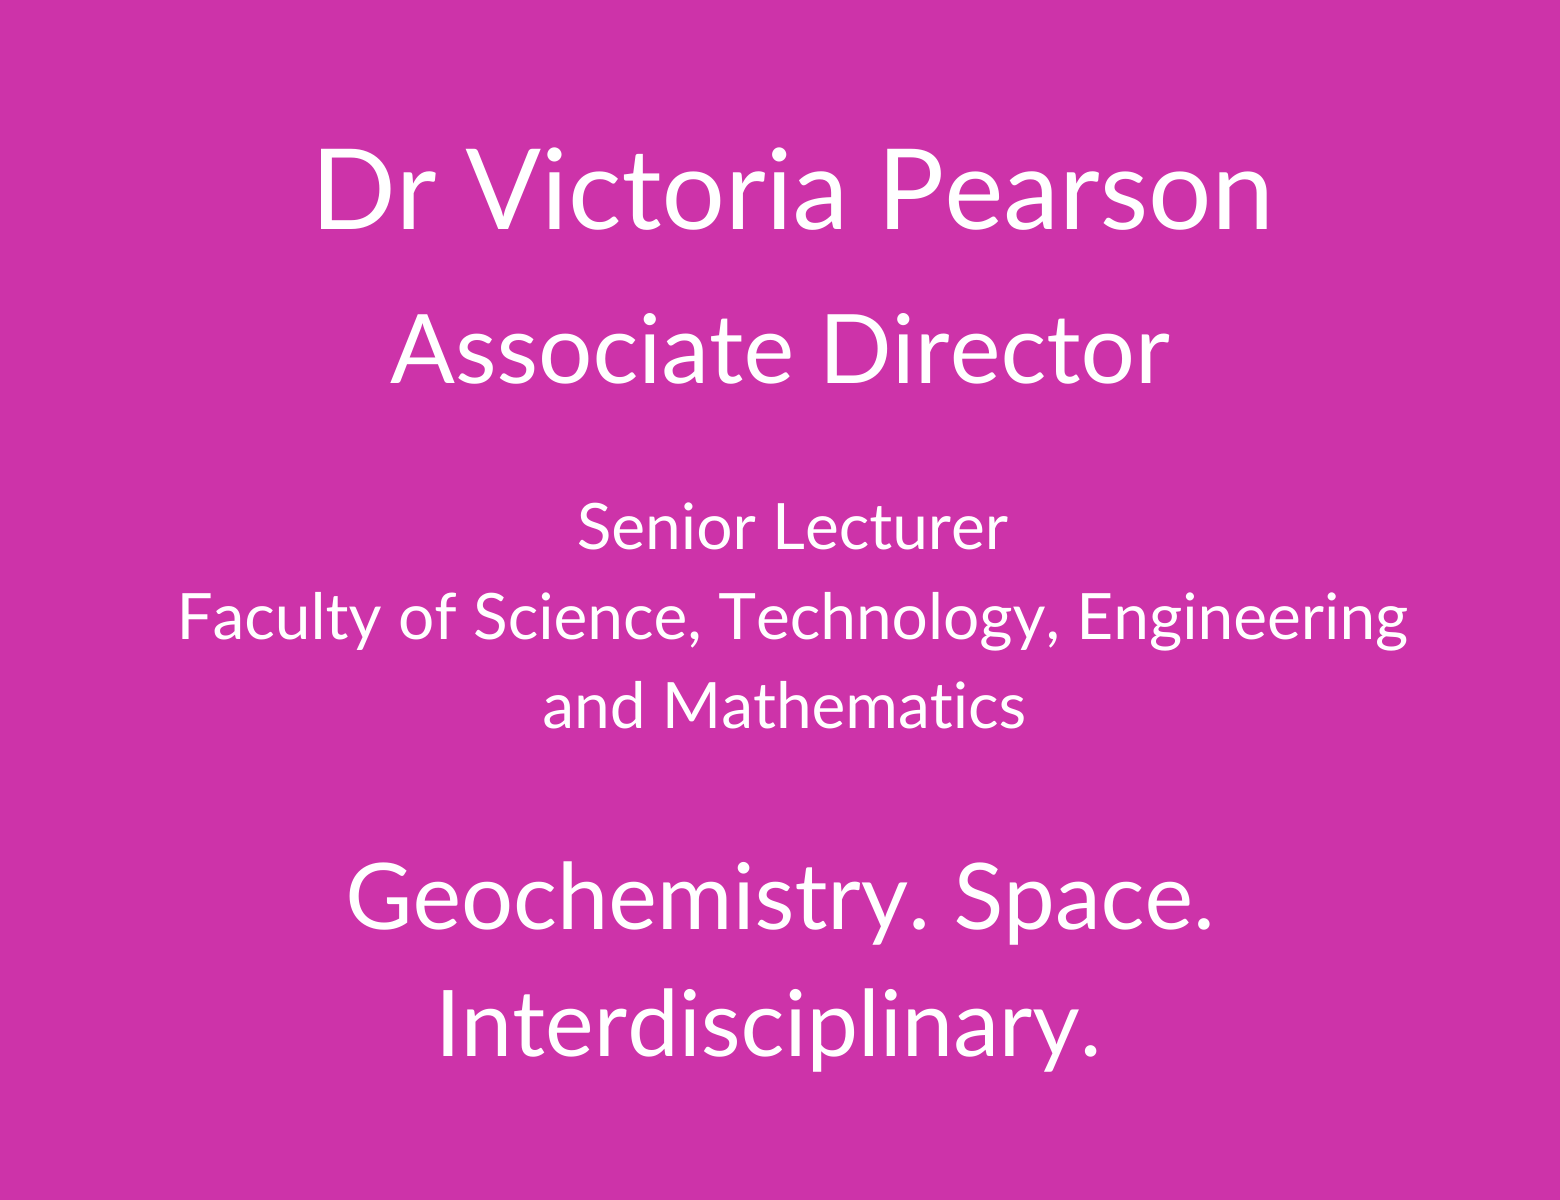 Dr Vic Pearson. Associate Director. Senior Lecturer. Faculty of Science. Technology, Engineering and Mathematics. Geochemistry. Space, Interdisciplinary.